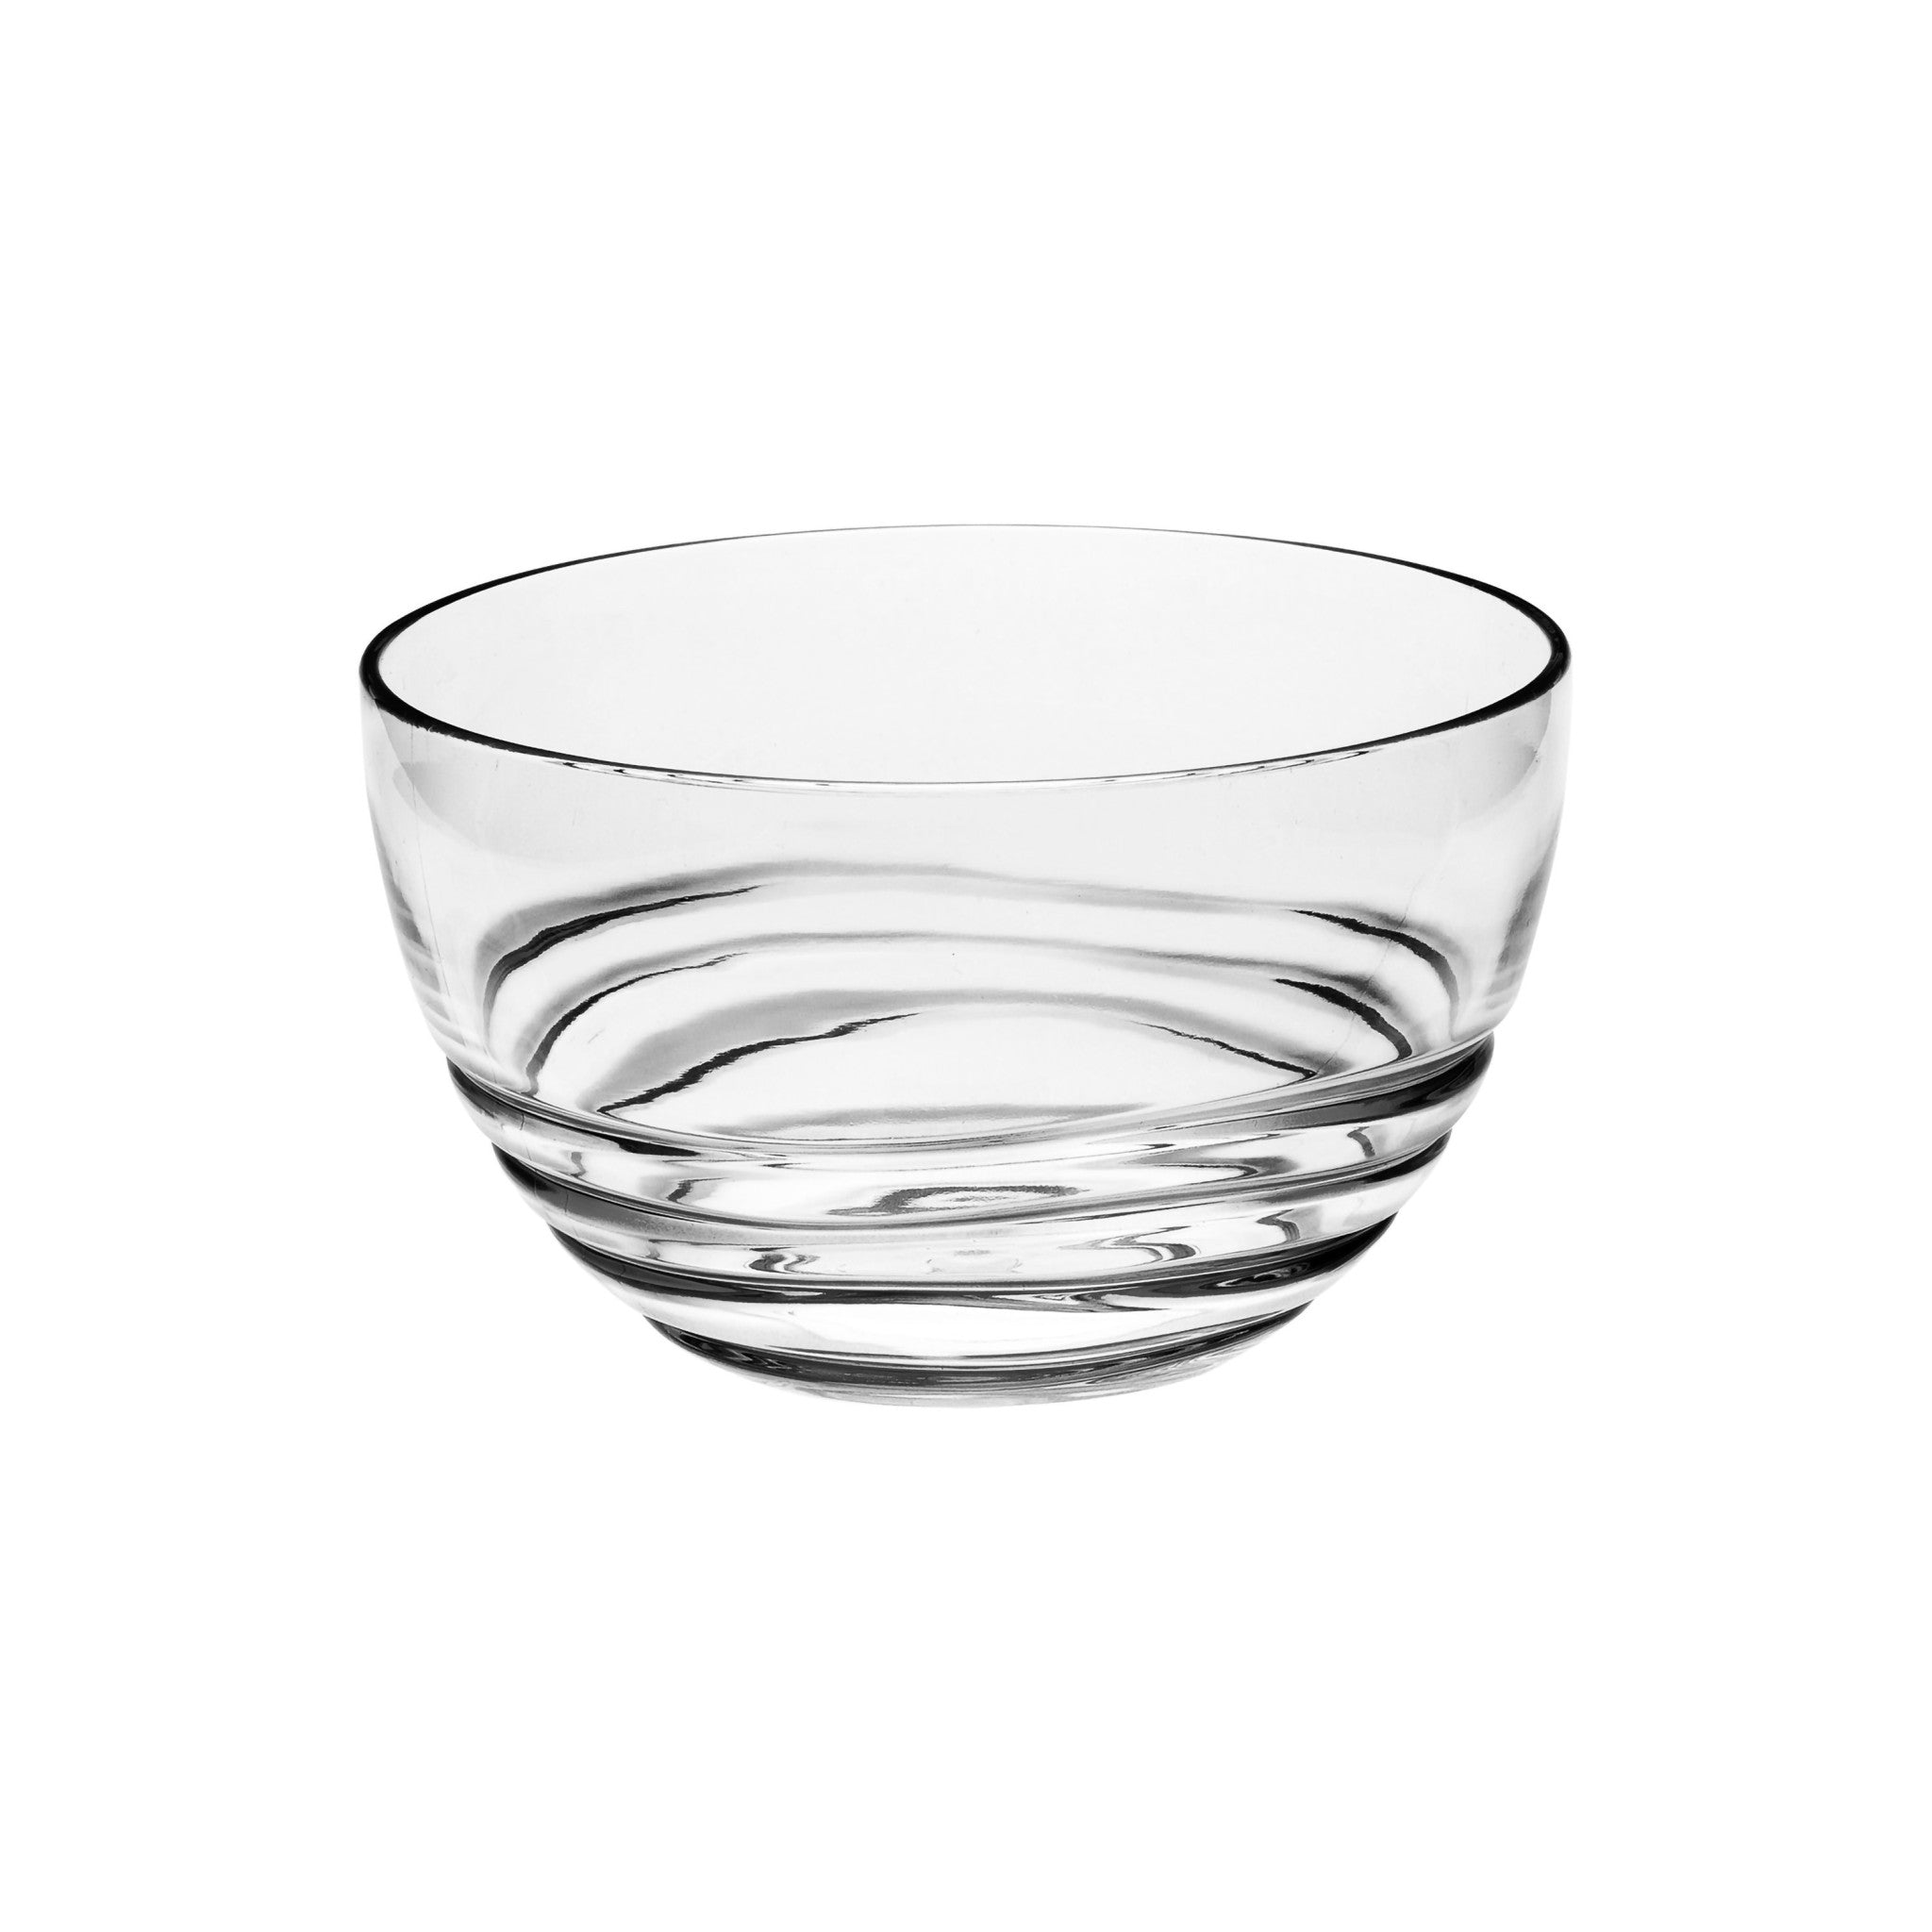 Clear-Four-Piece-Round-Swirl-Acrylic-Service-For-Four-Bowl-Set-Dinnerware-Sets